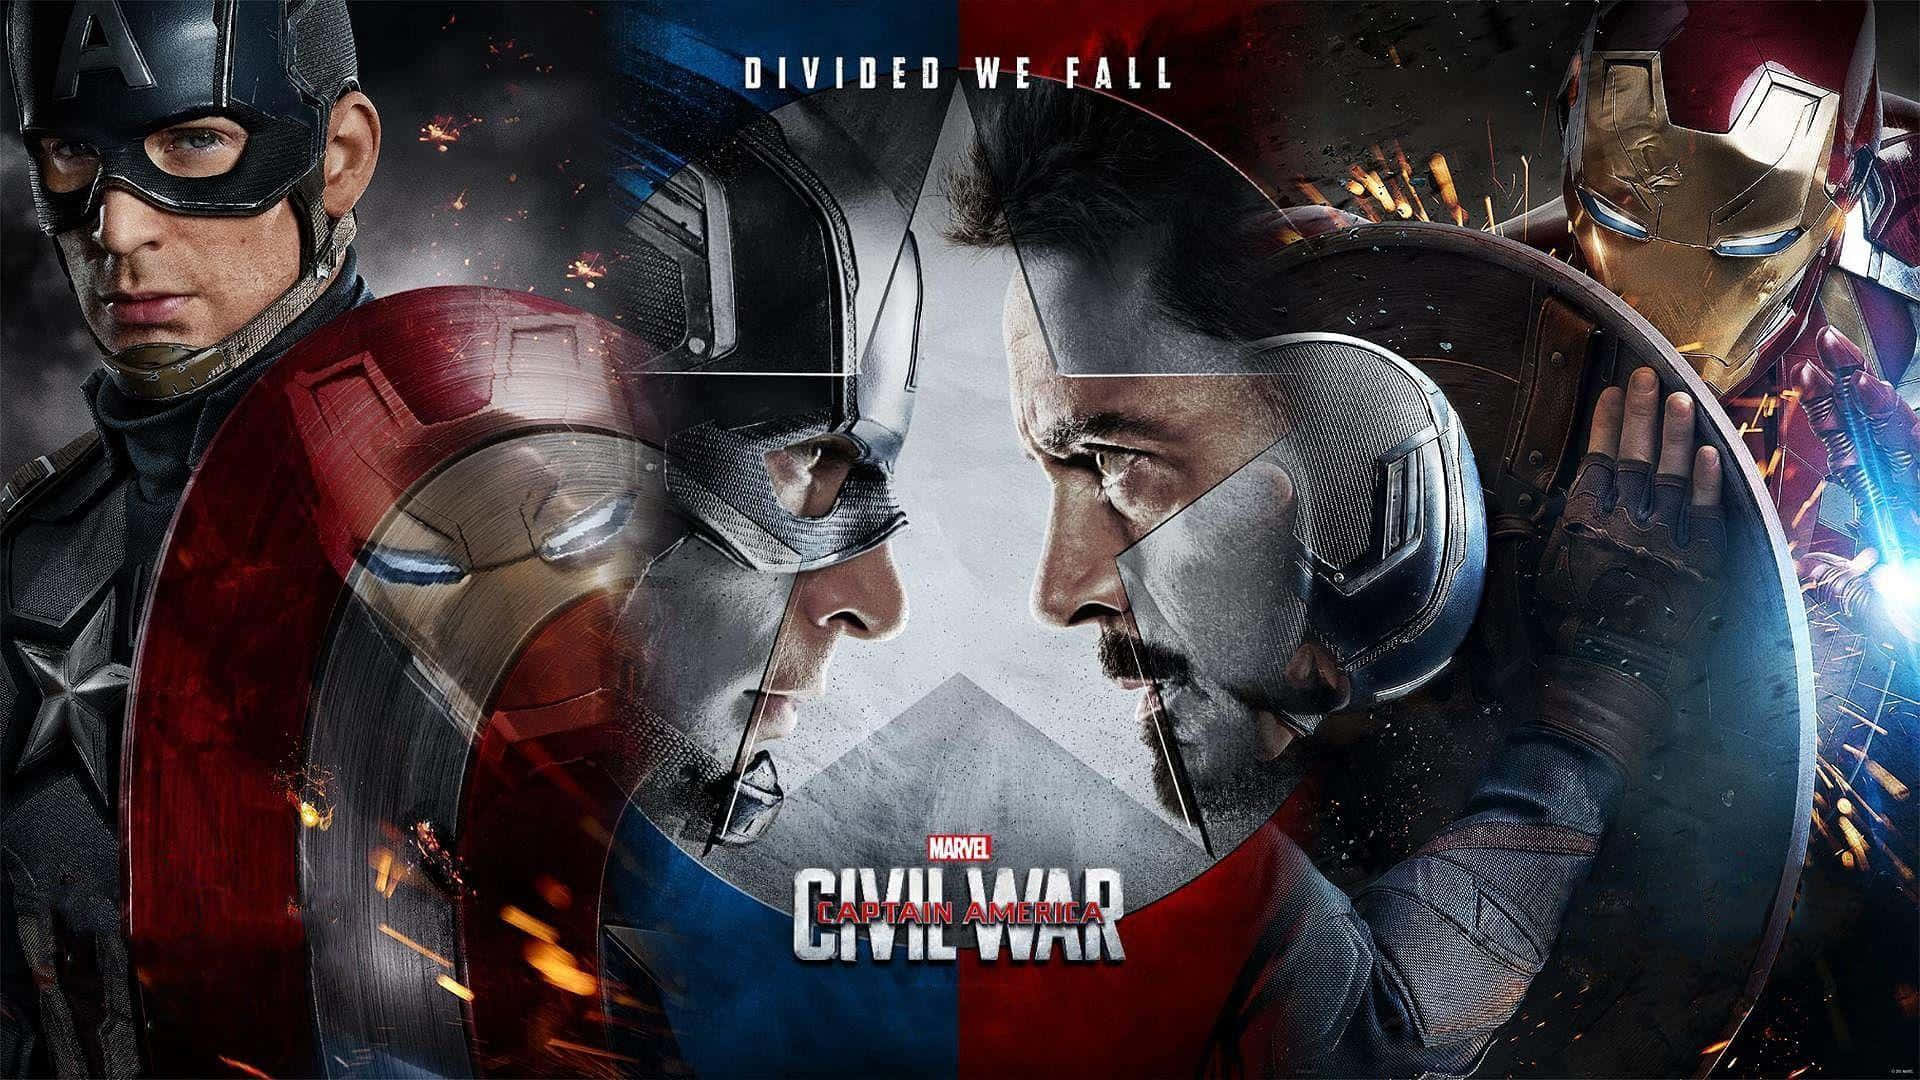 Iron Man and Captain America locked in epic battle Wallpaper